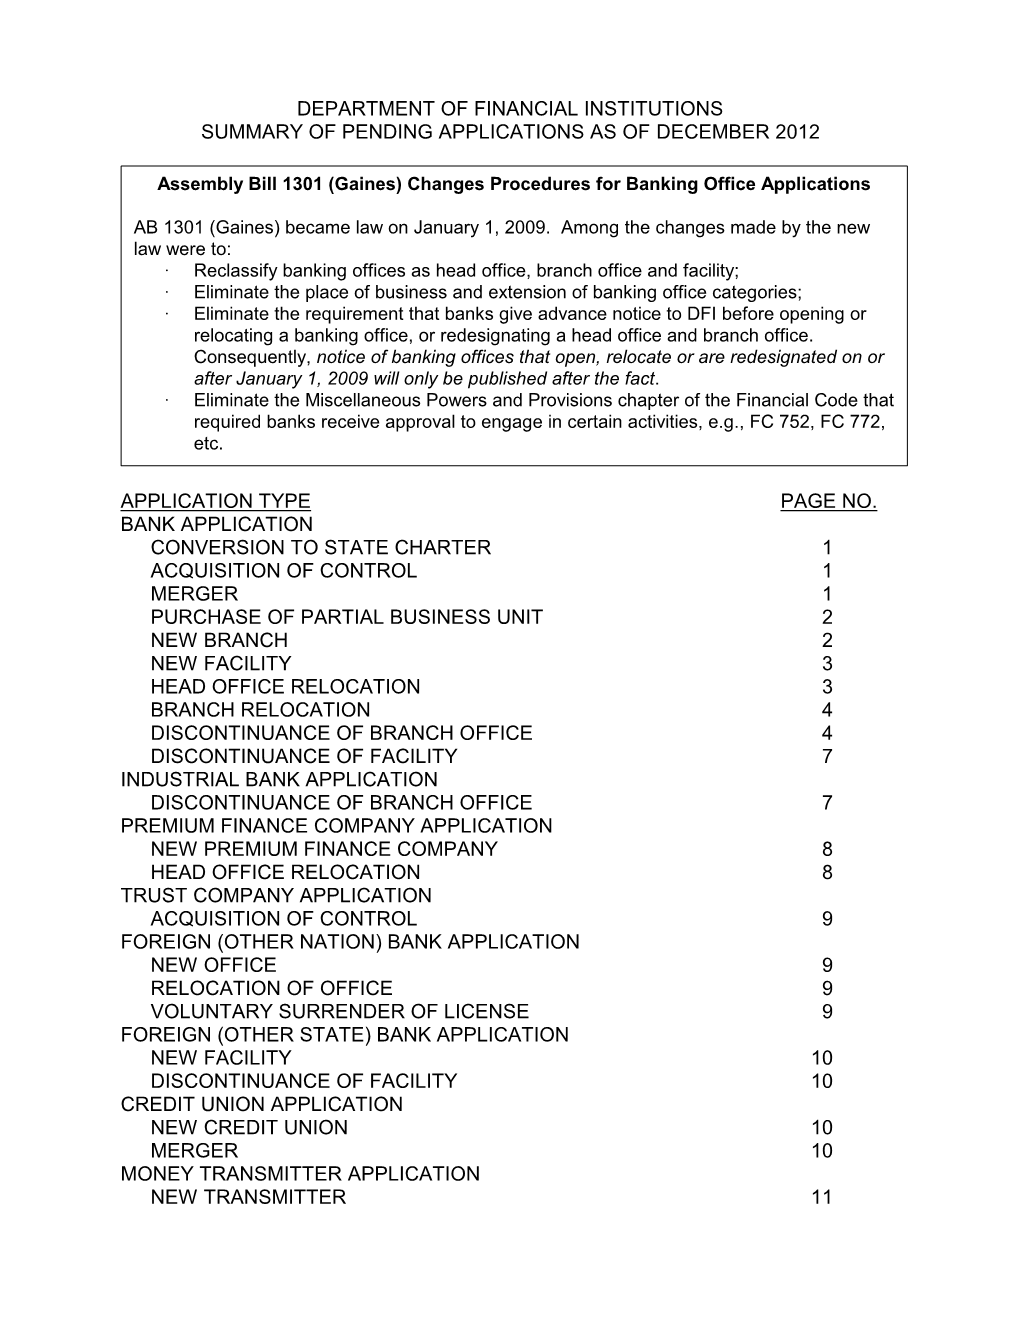 Department of Financial Institutions Summary of Pending Applications As of December 2012